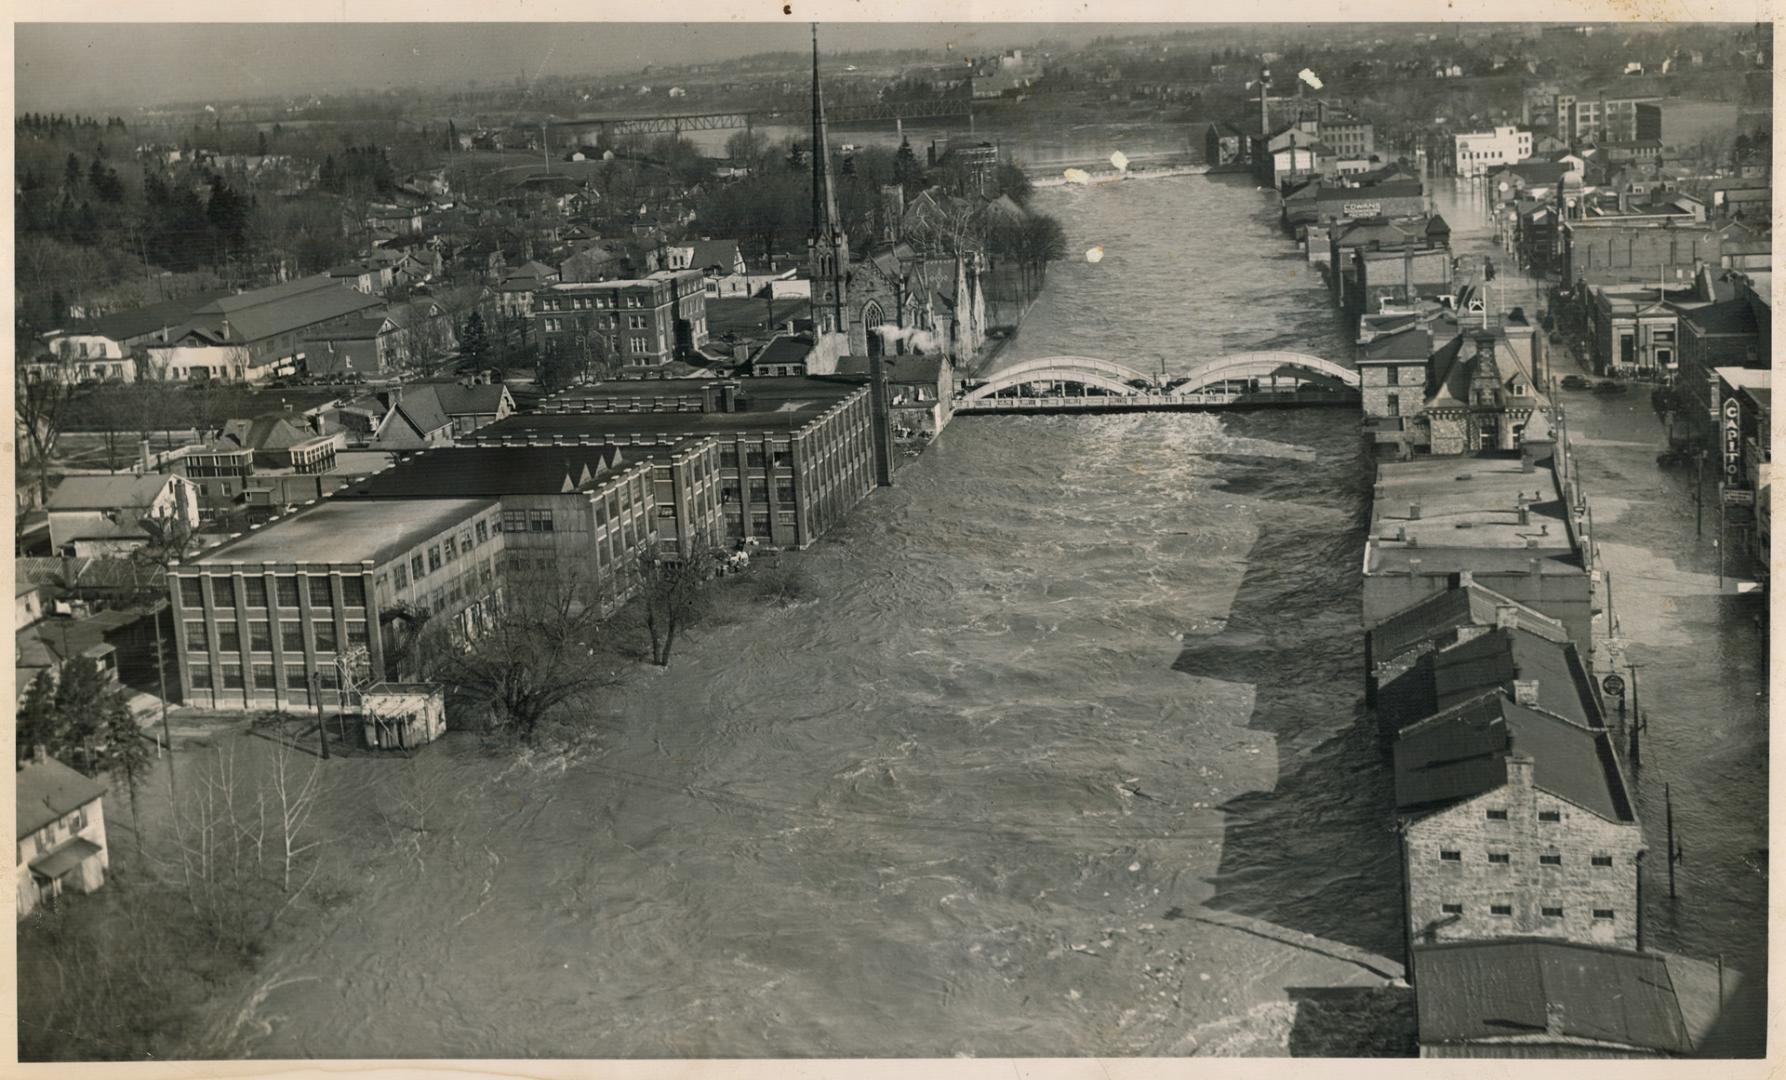 Rising 17 feet above its normal depth, the Grand river is shown here at Galt